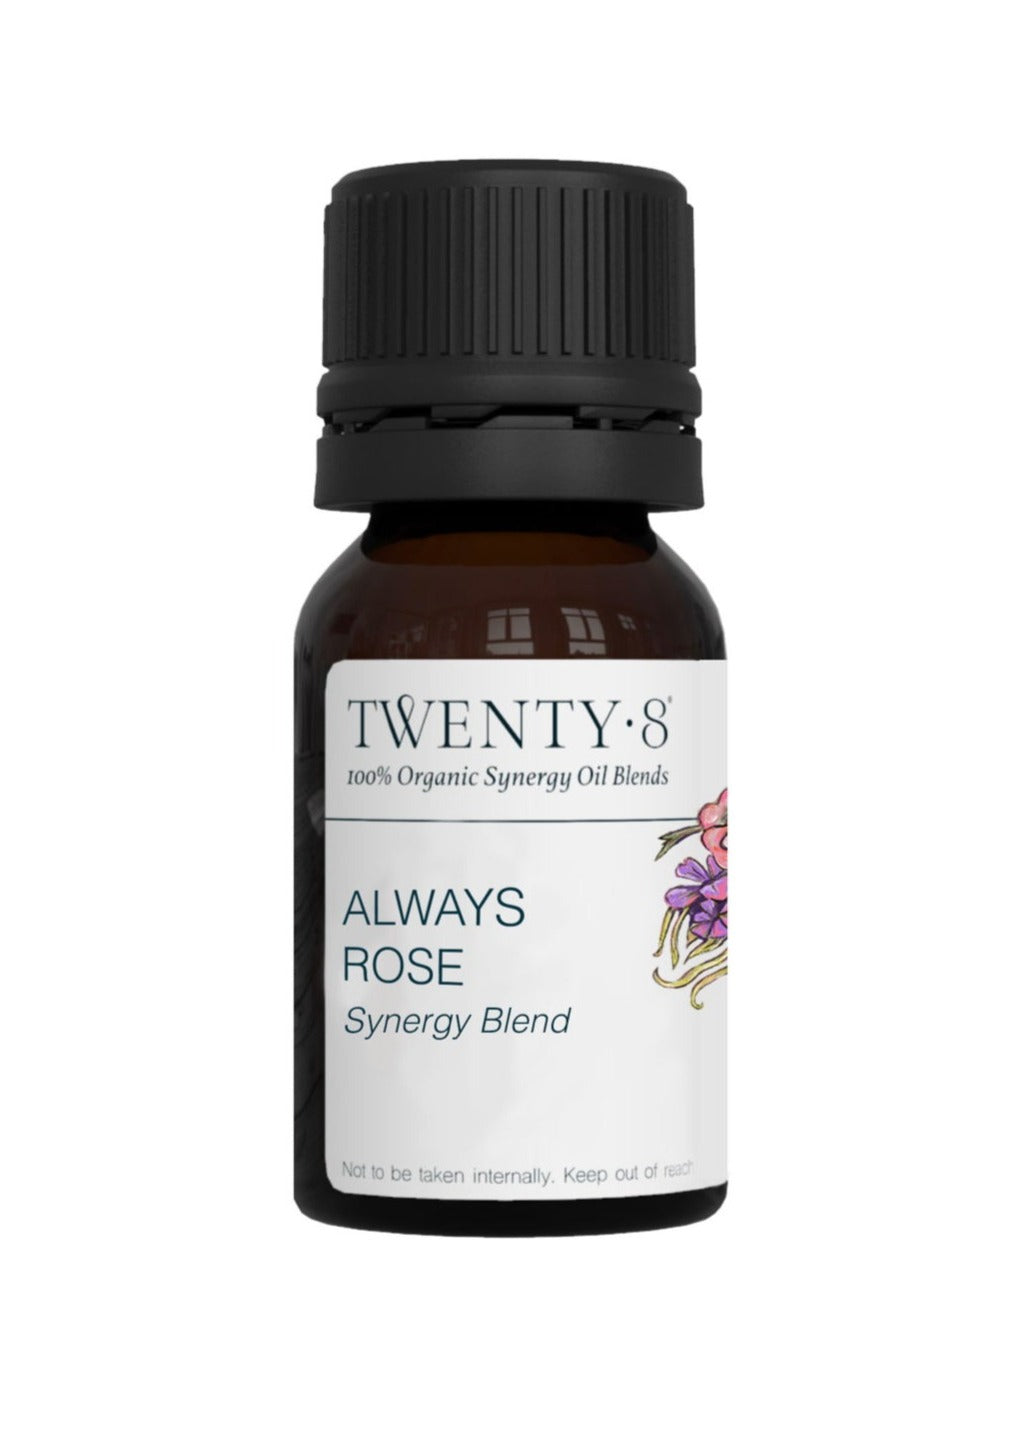 Always Rose - Synergy Blend, 10ml  An exquisite floral blend to ignite soulful energy, increase sensuality and awaken the power of love. Inhaling this blend of rose, geranium, lime, ginger, palmarosa and ylang ylang will have you feel like you have been lulled into a fragrant array of delicate notes that support a more uplifted and positive lens on life.